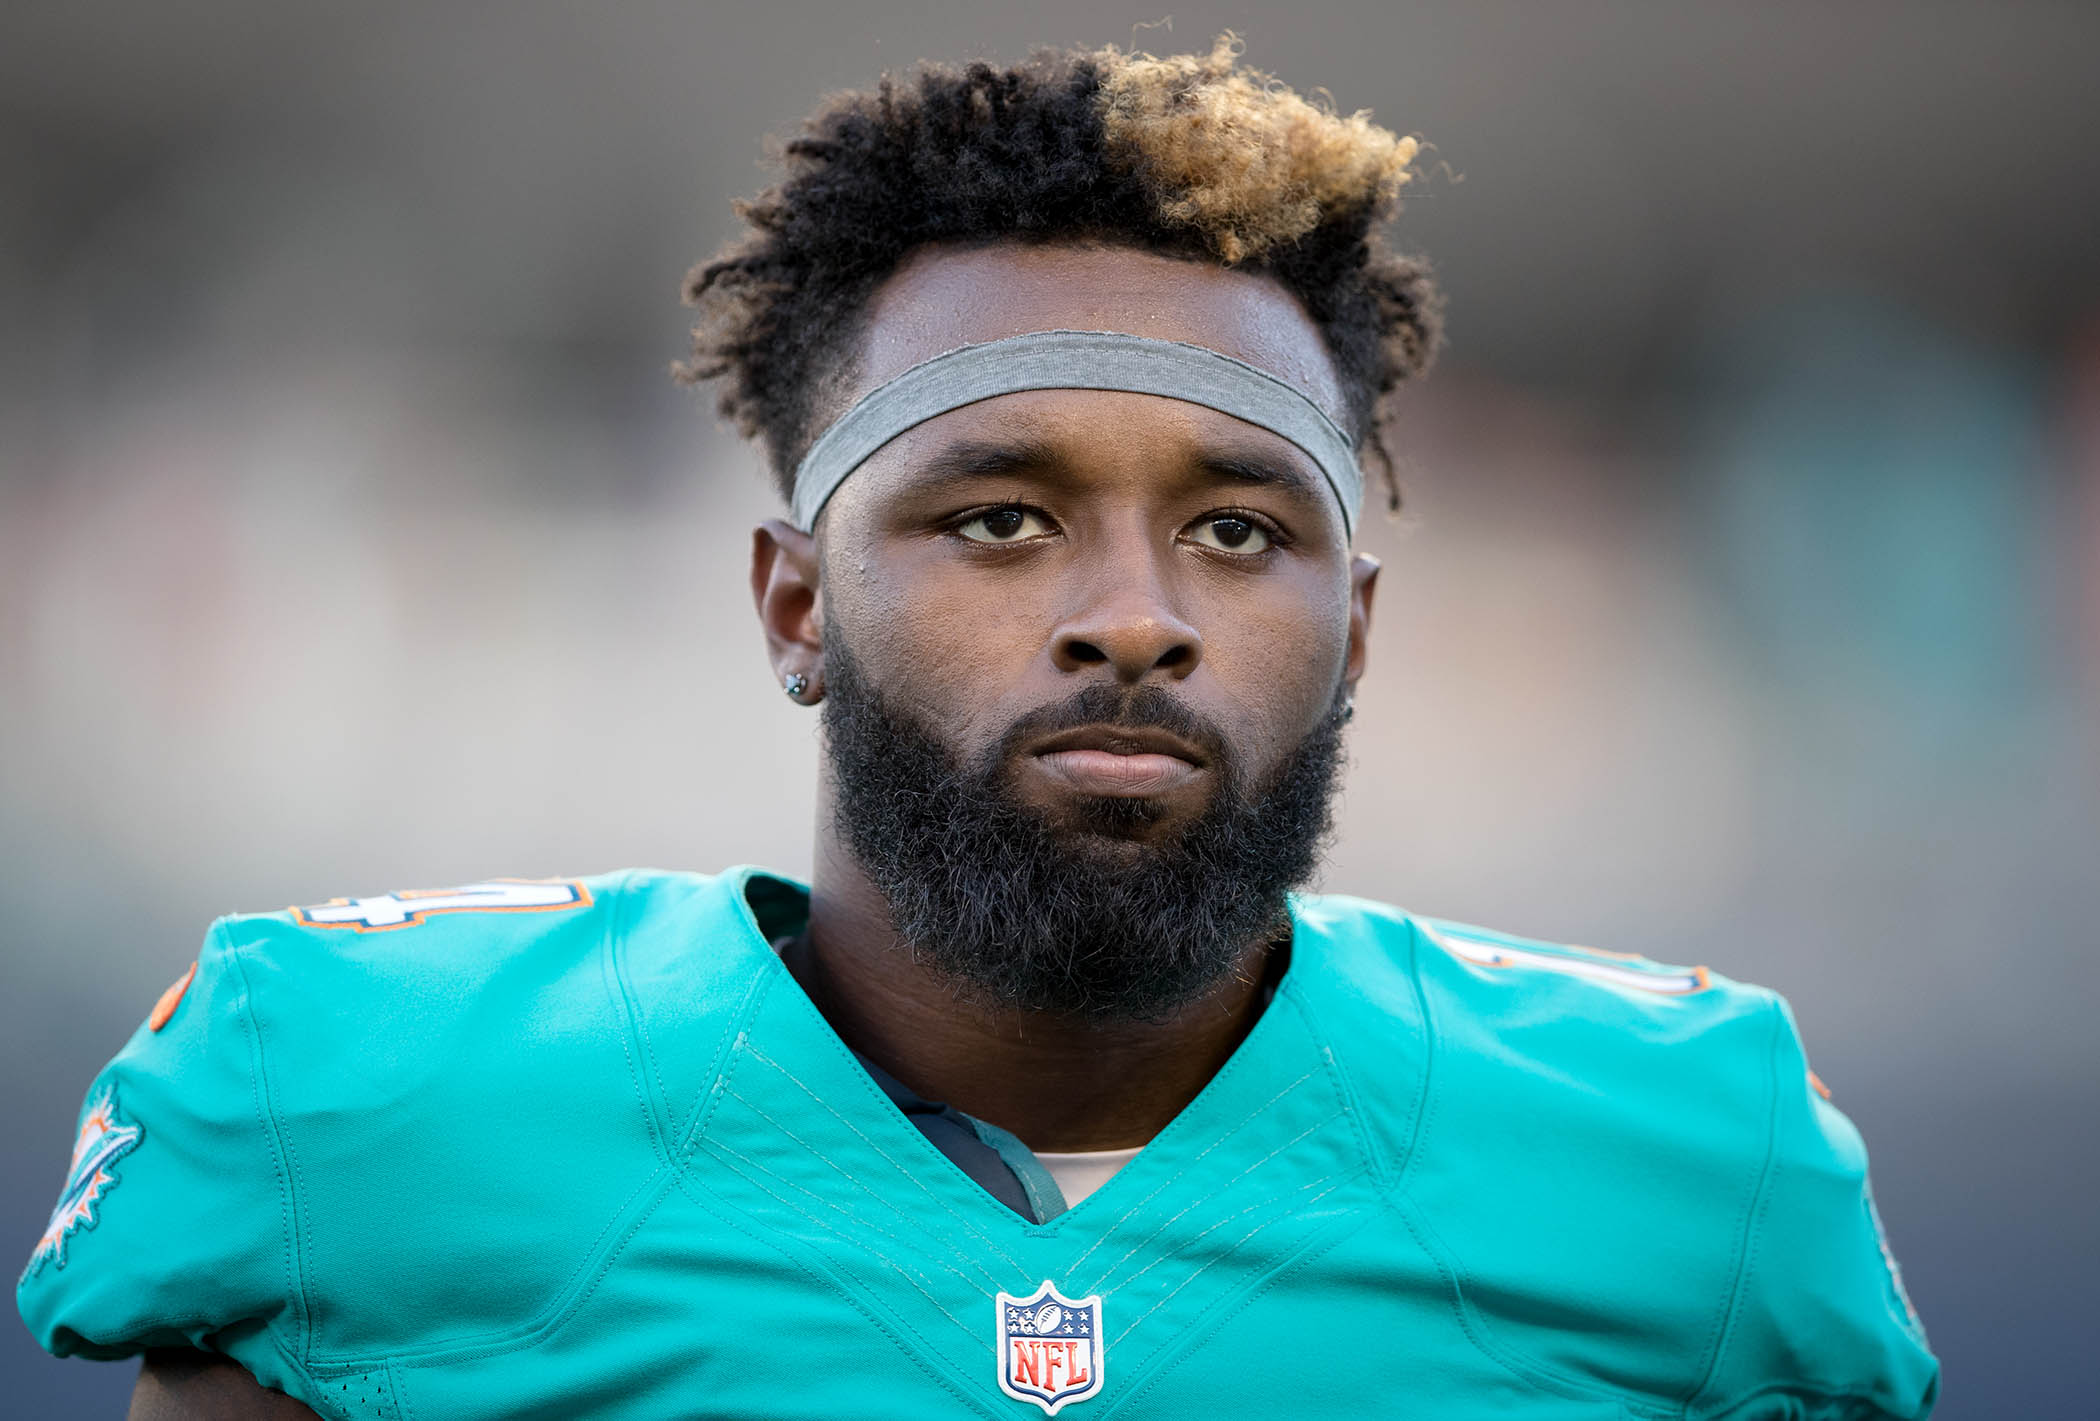 Miami Dolphins Wide Receiver Jarvis Landry At Camping - Jarvis Landry Hot - HD Wallpaper 